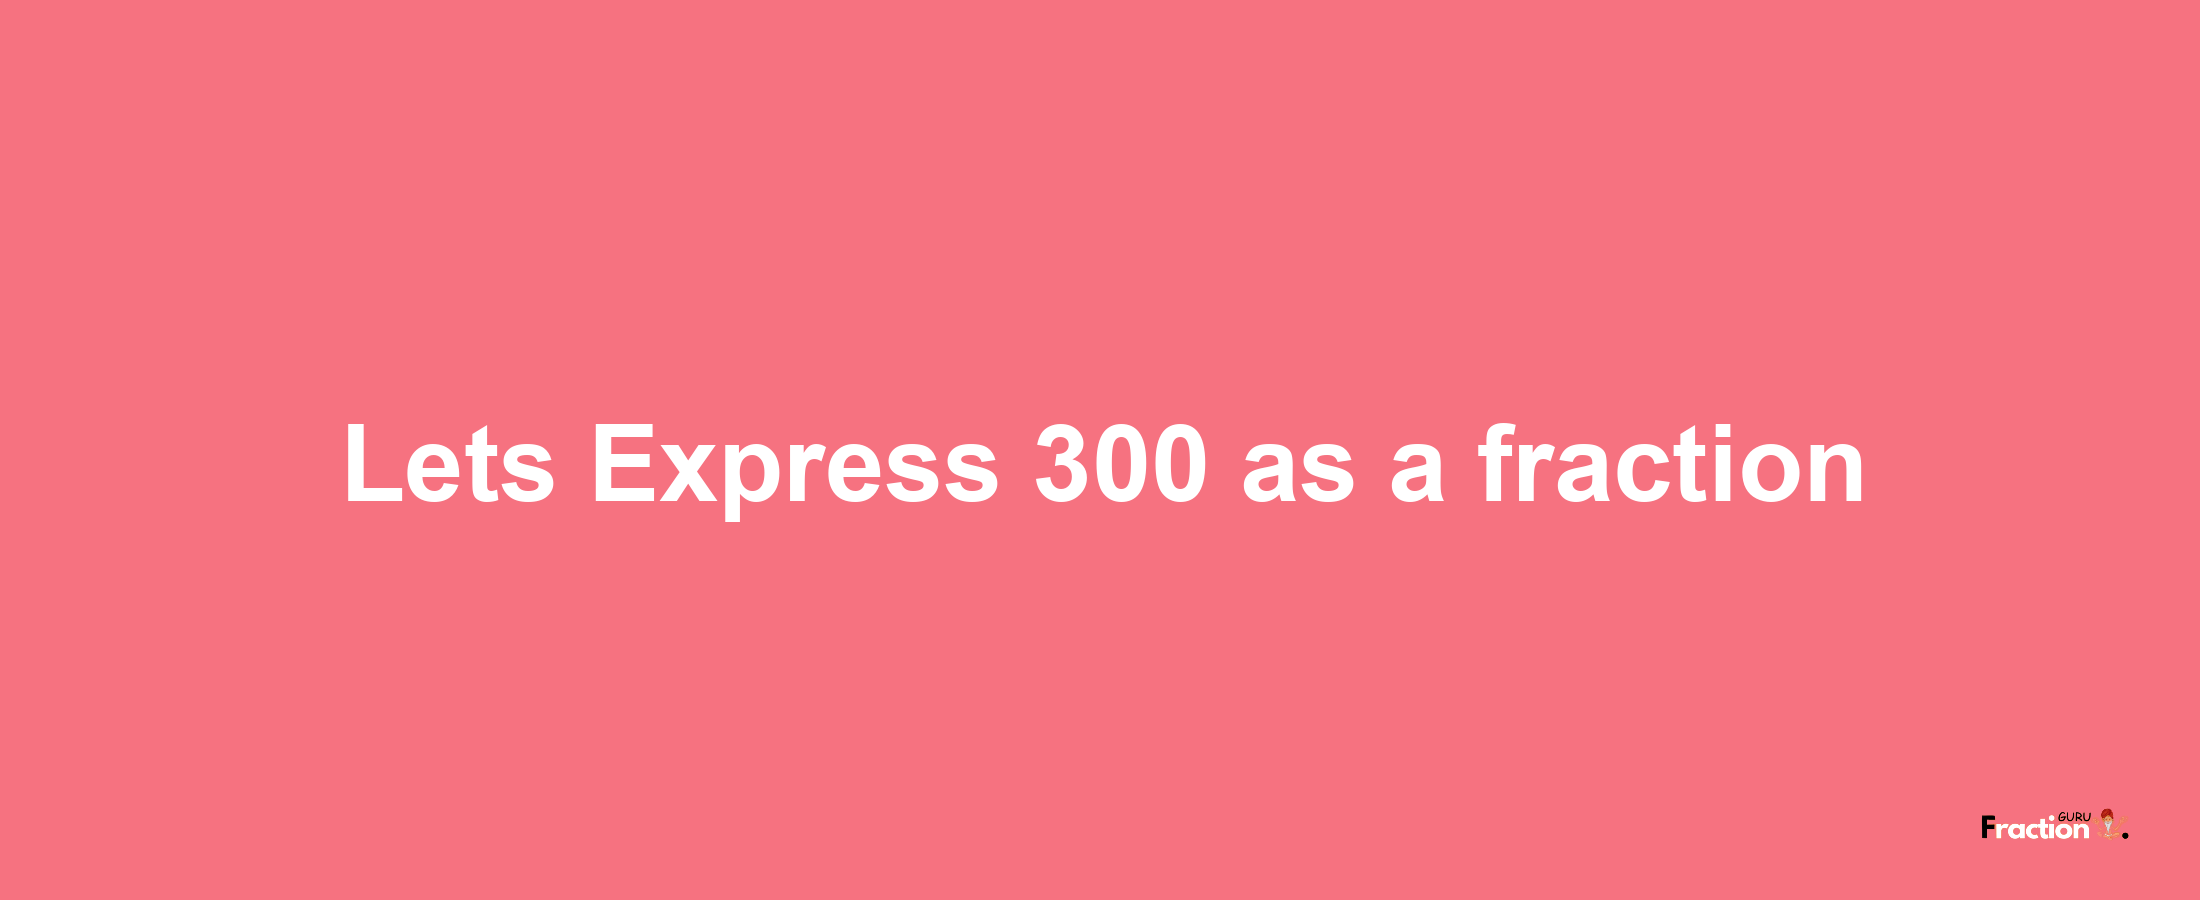 Lets Express 300 as afraction